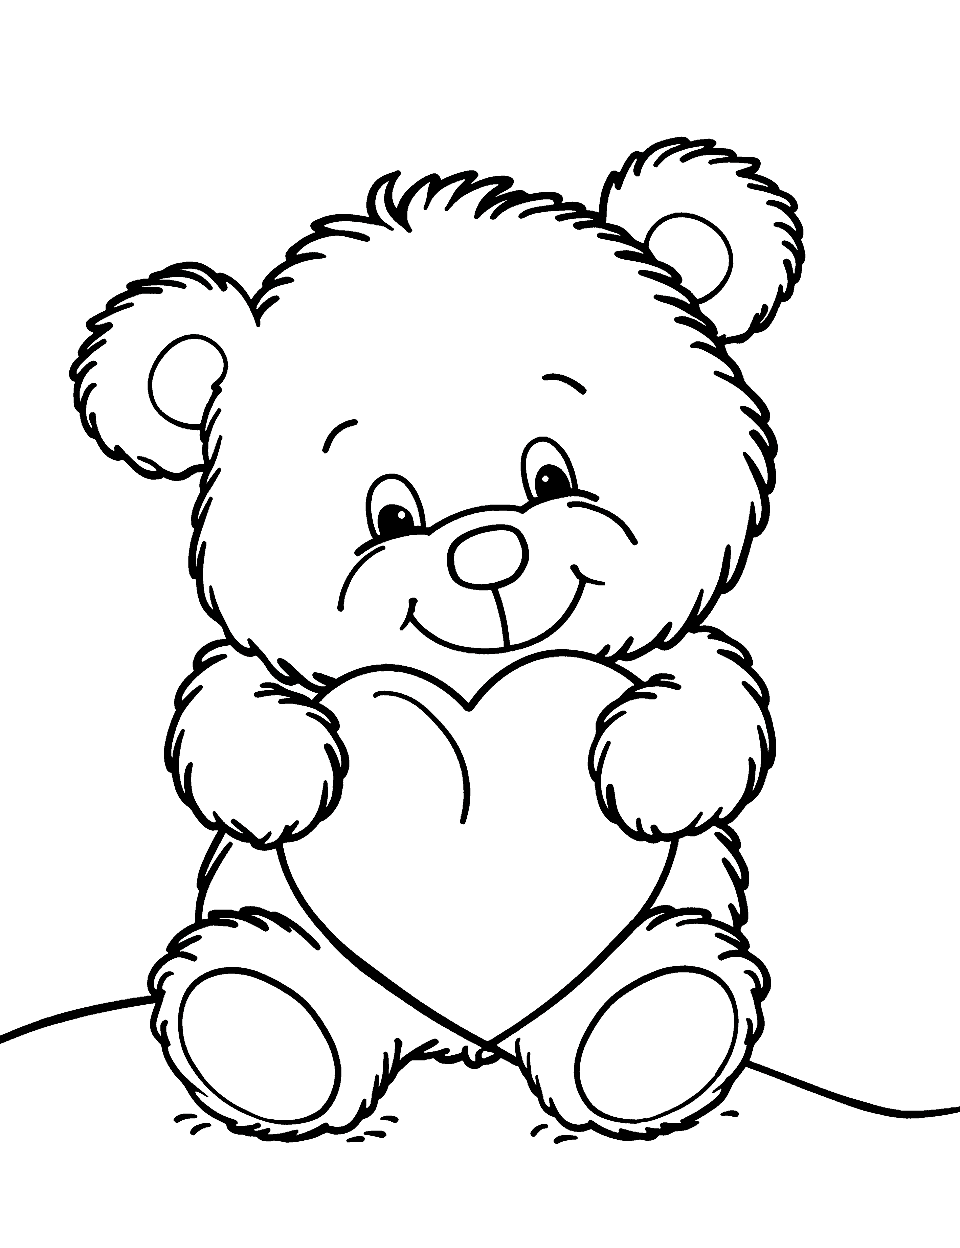 Small Teddy Bear with Big Heart Coloring Page - A small teddy bear holding a large heart.